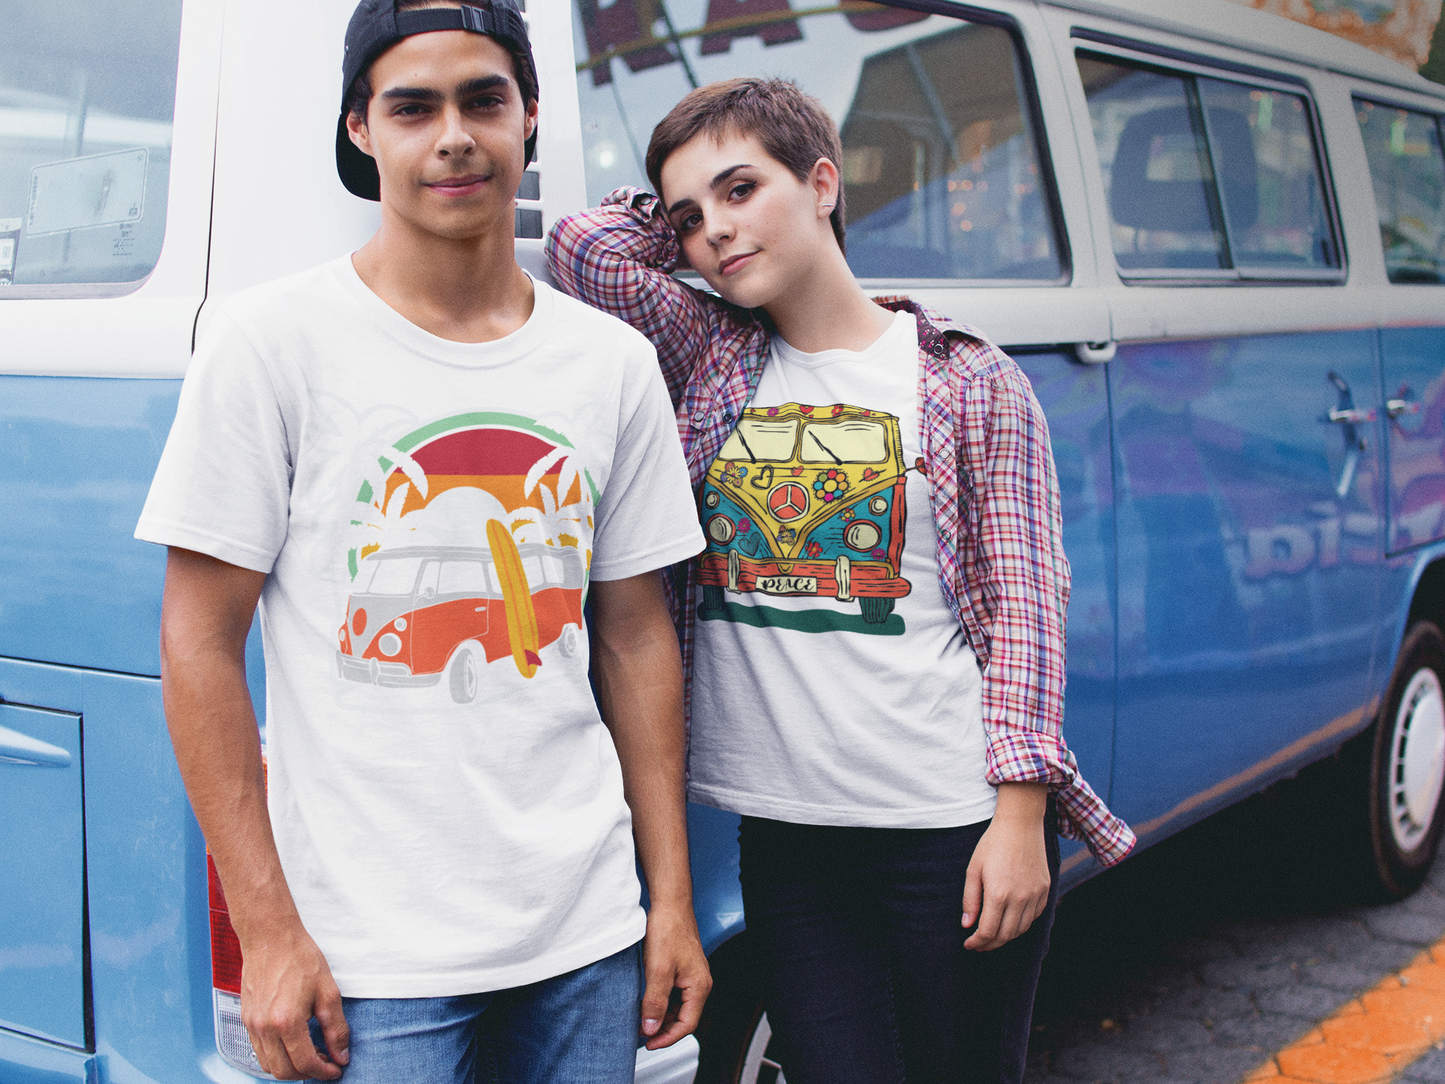 Hippy Inspired T Shirts